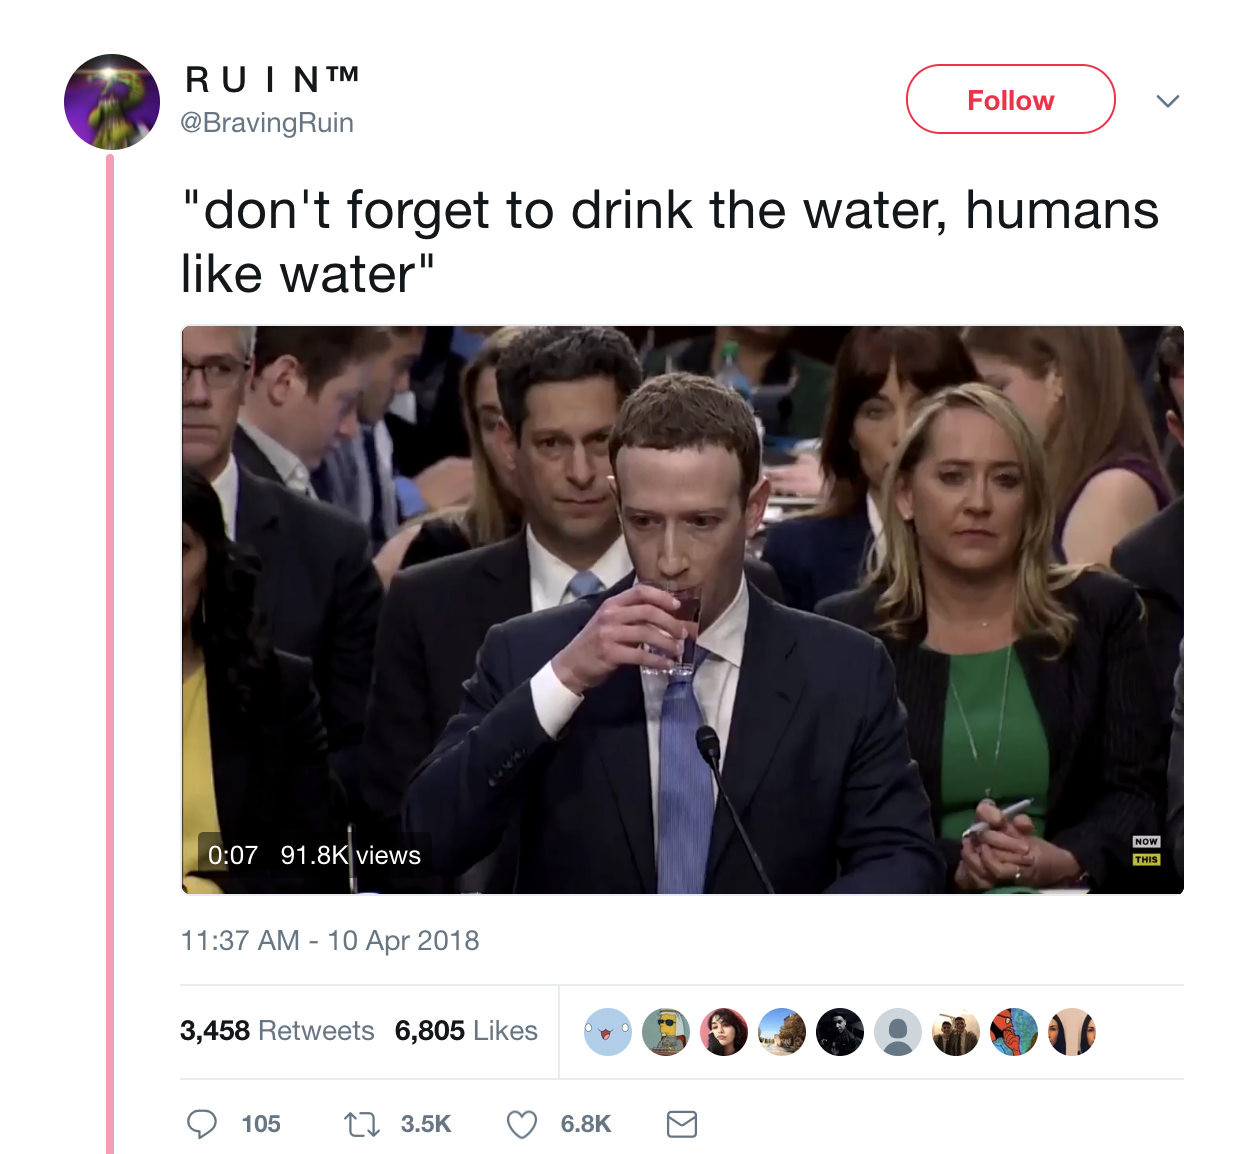 mark zuckerberg robot meme trial - Rui N "don't forget to drink the water, humans water" 91.86 views 3,458 6,805 3,458 6,805 0 105 12